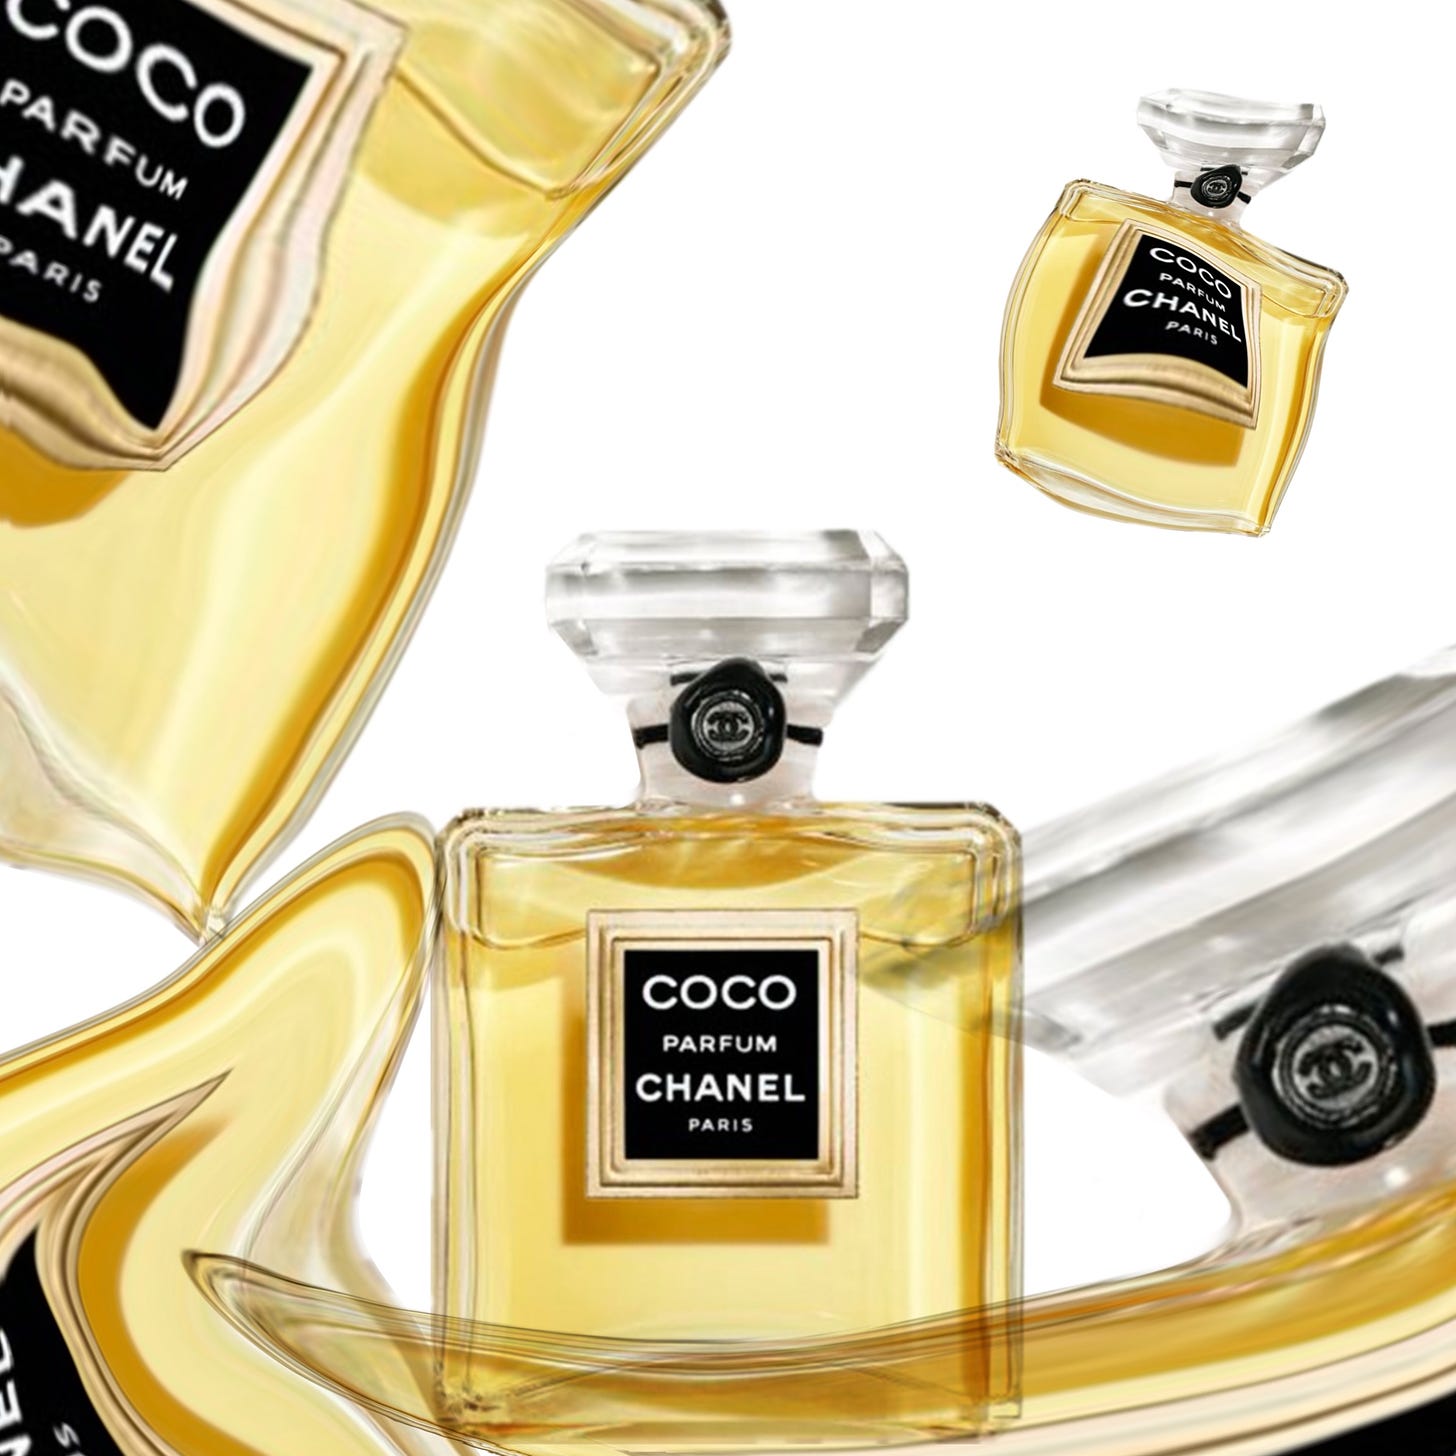 Chanel Coco review by award-winning perfume critic Persolaise, 2024